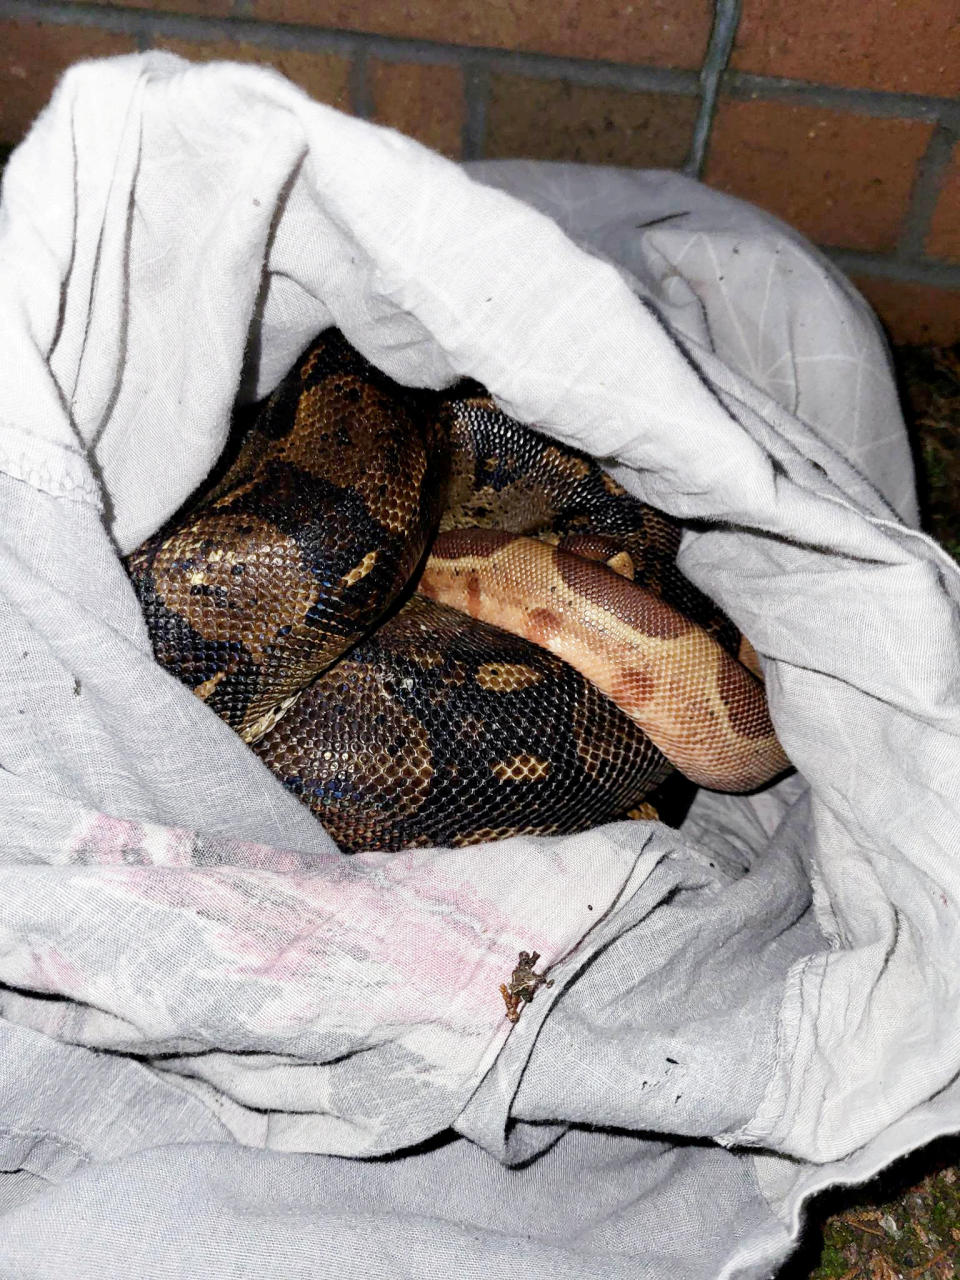 Maria Clutterbuck thought the sacks may have contained puppies or kittens but they turned out to be snakes. (SWNS)